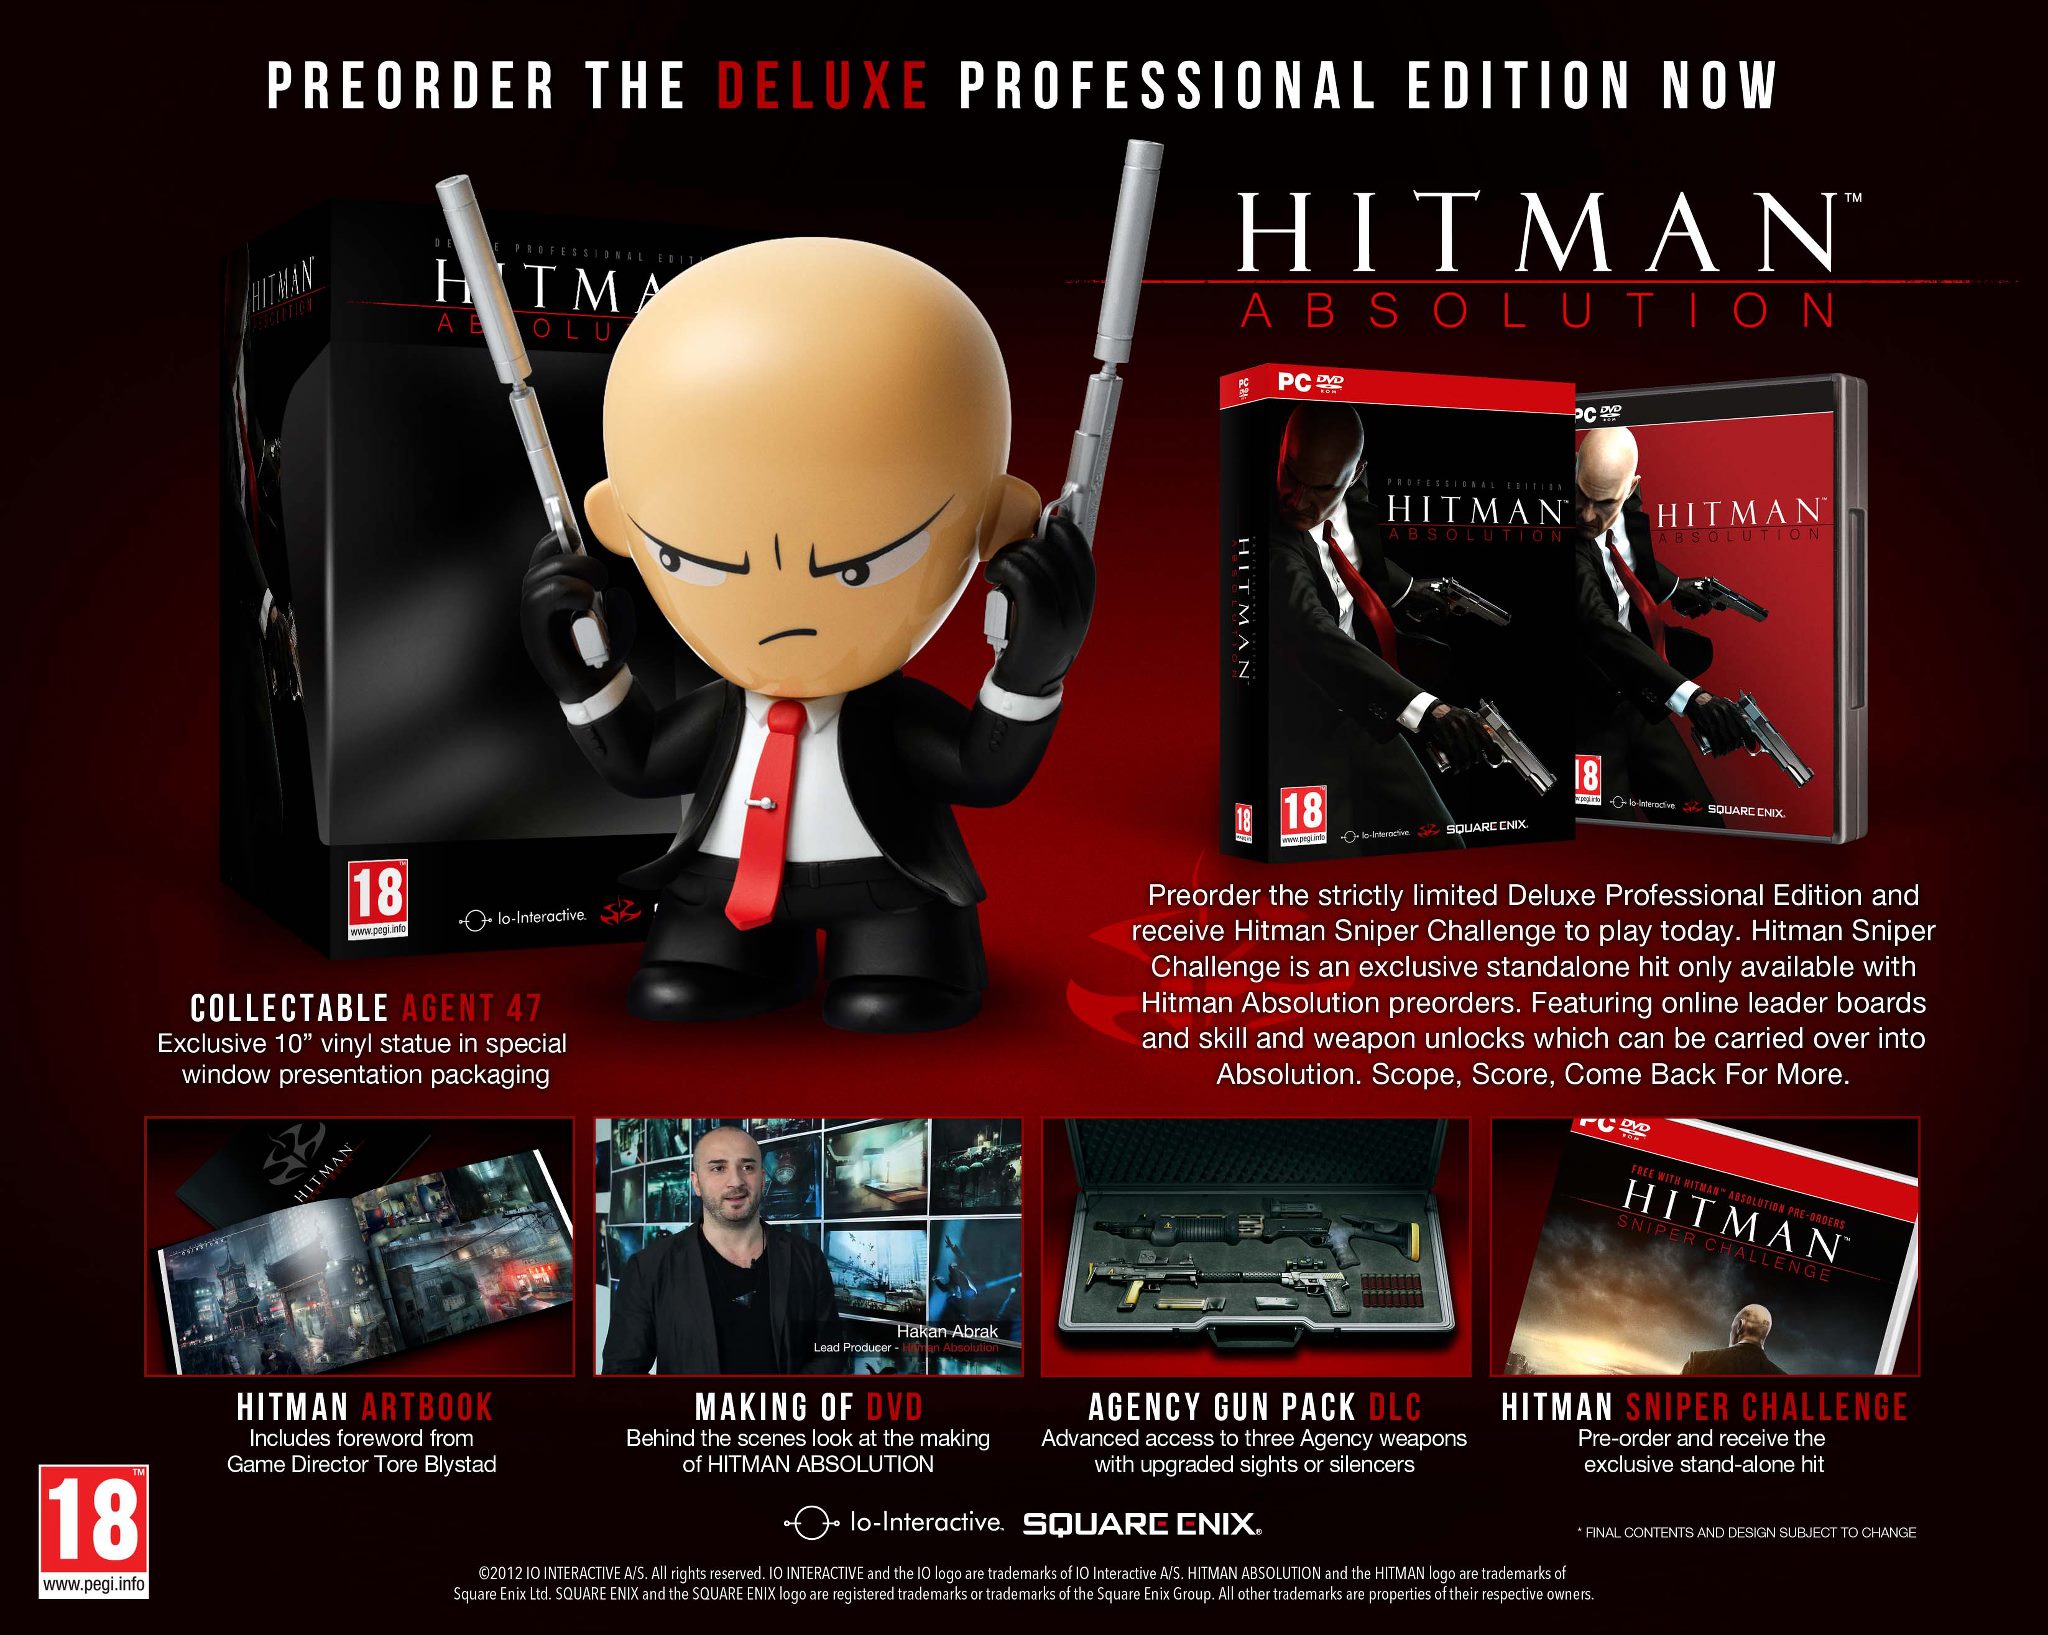 Hitman Absolution: Deluxe Professional Edition